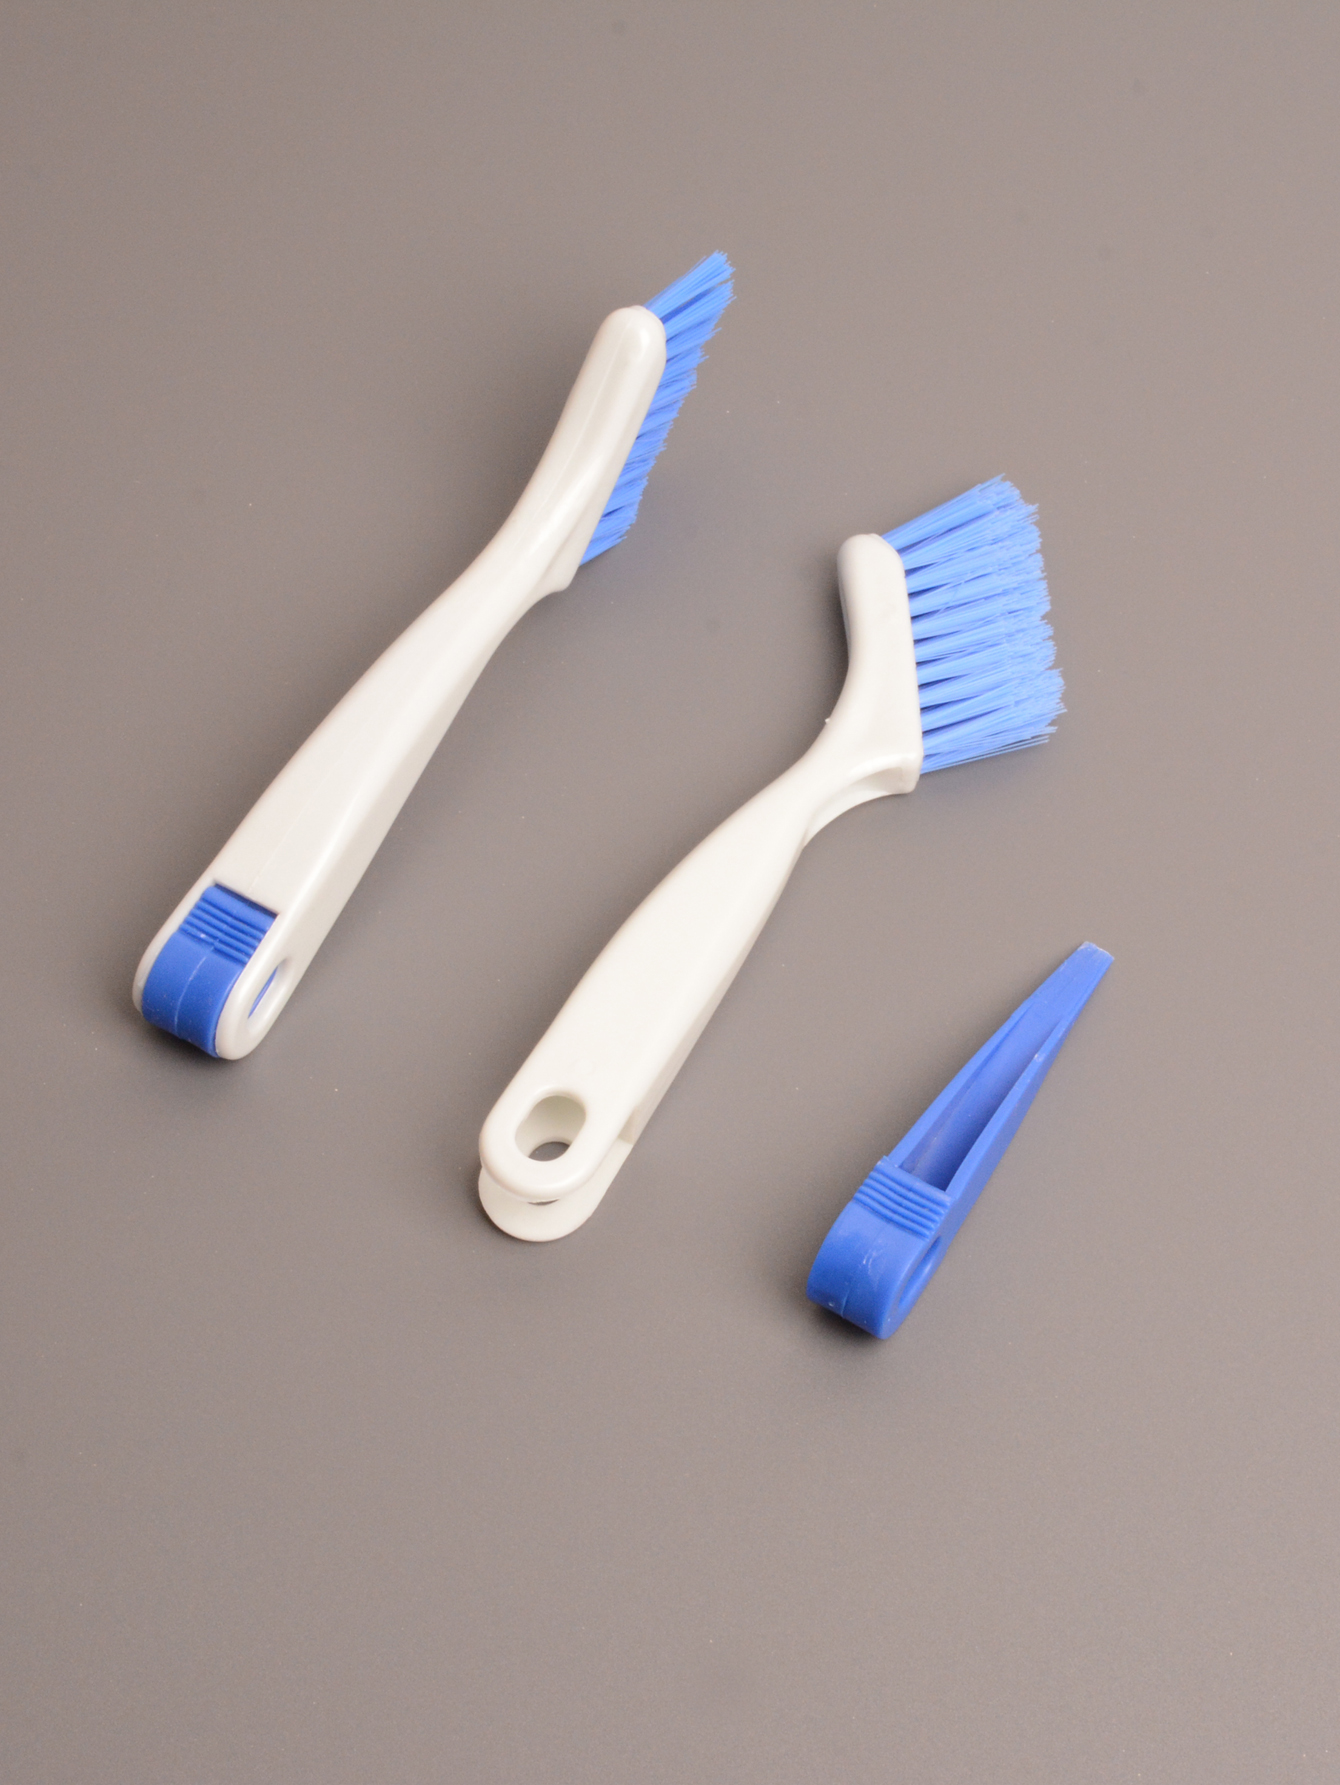 Small Cleaning Brushes for Household Cleaning Deep Detail Crevice Cleaning  Tool